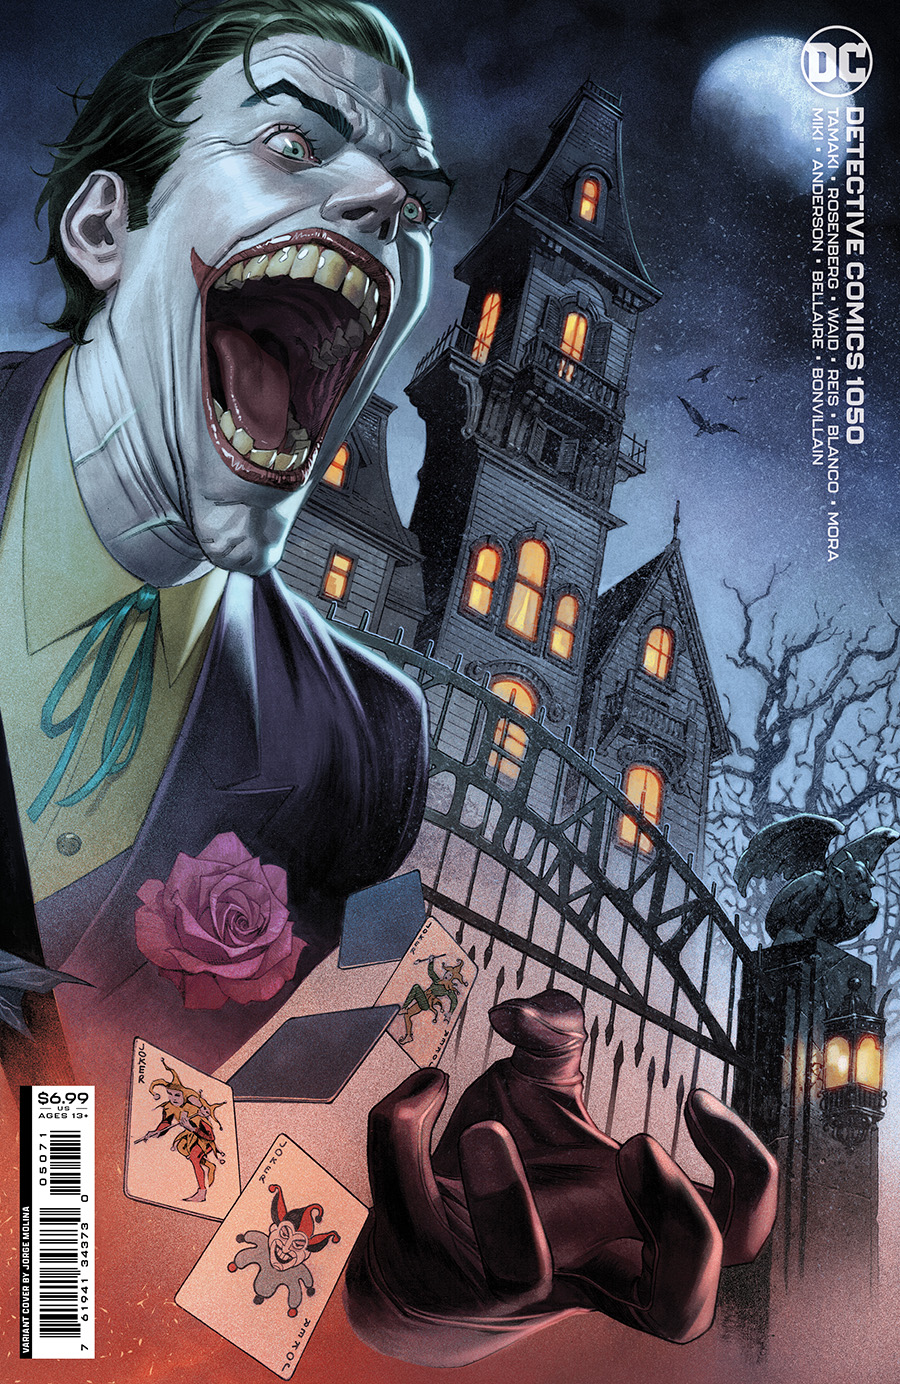 Detective Comics Vol 2 #1050 Cover F Variant Jorge Molina Connecting Legacy Joker Card Stock Cover